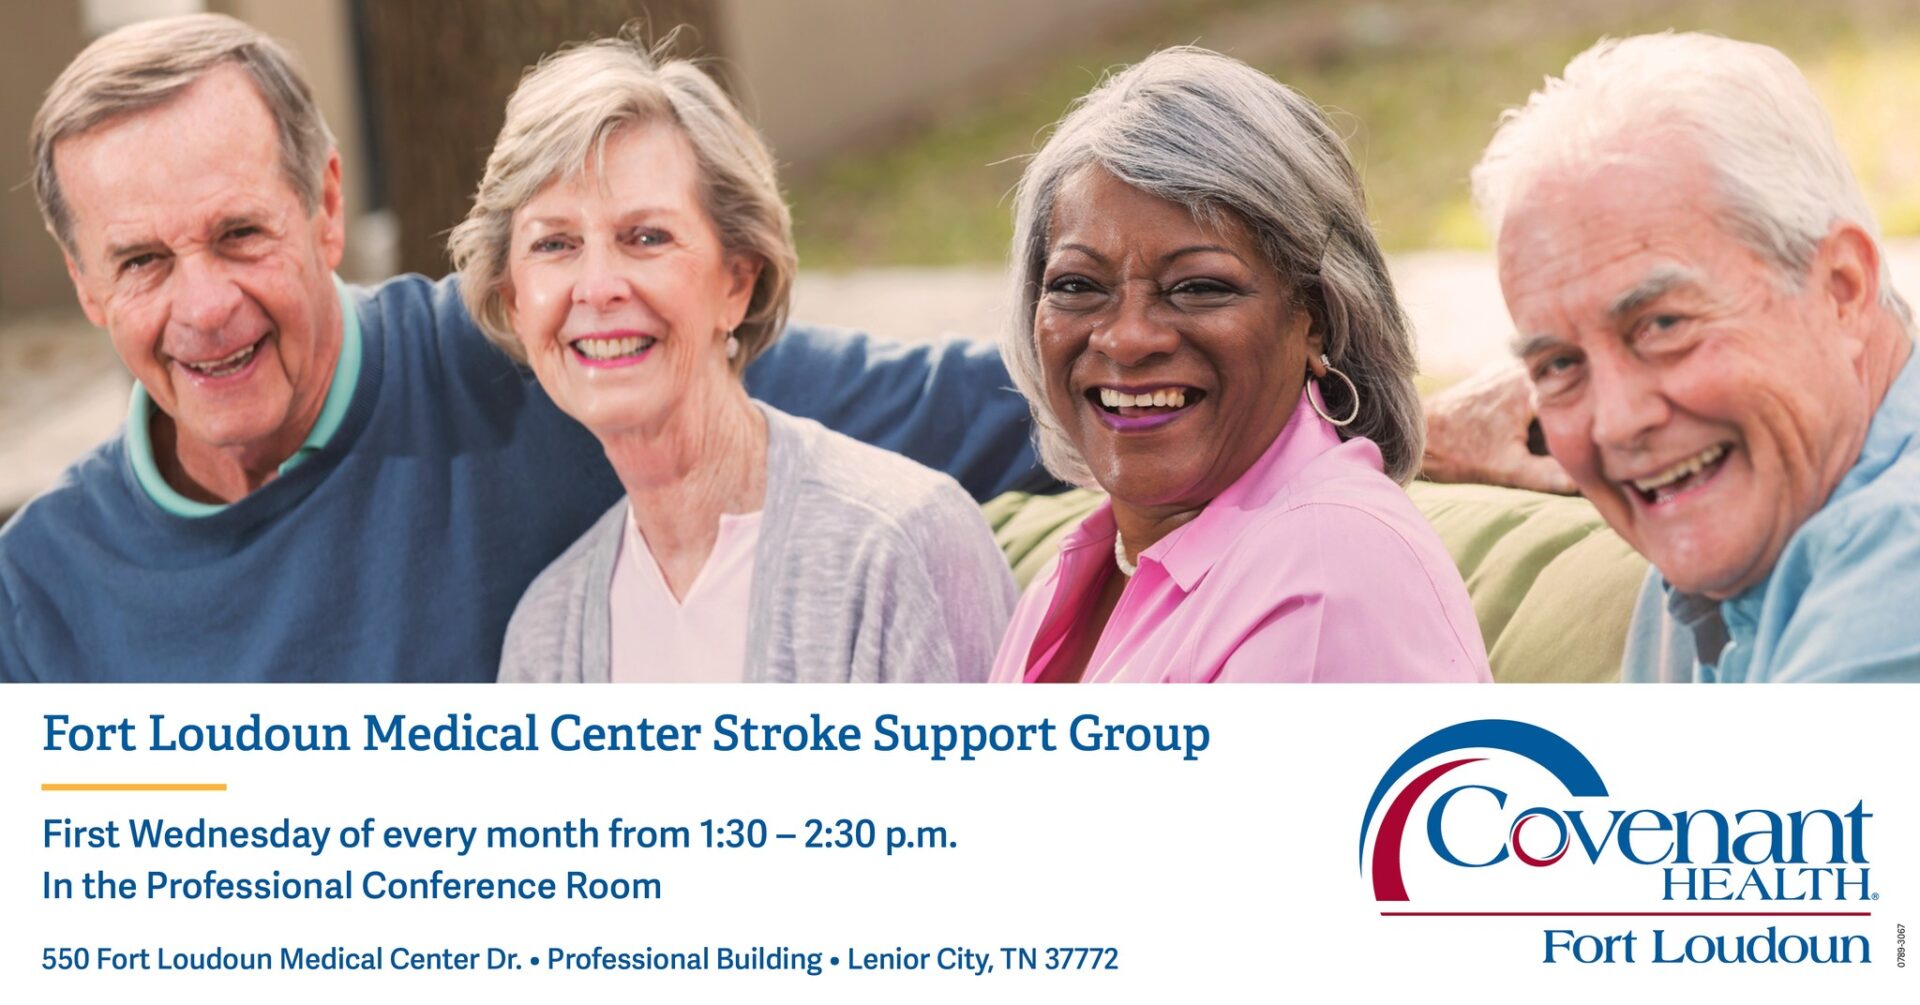 Stroke support group image